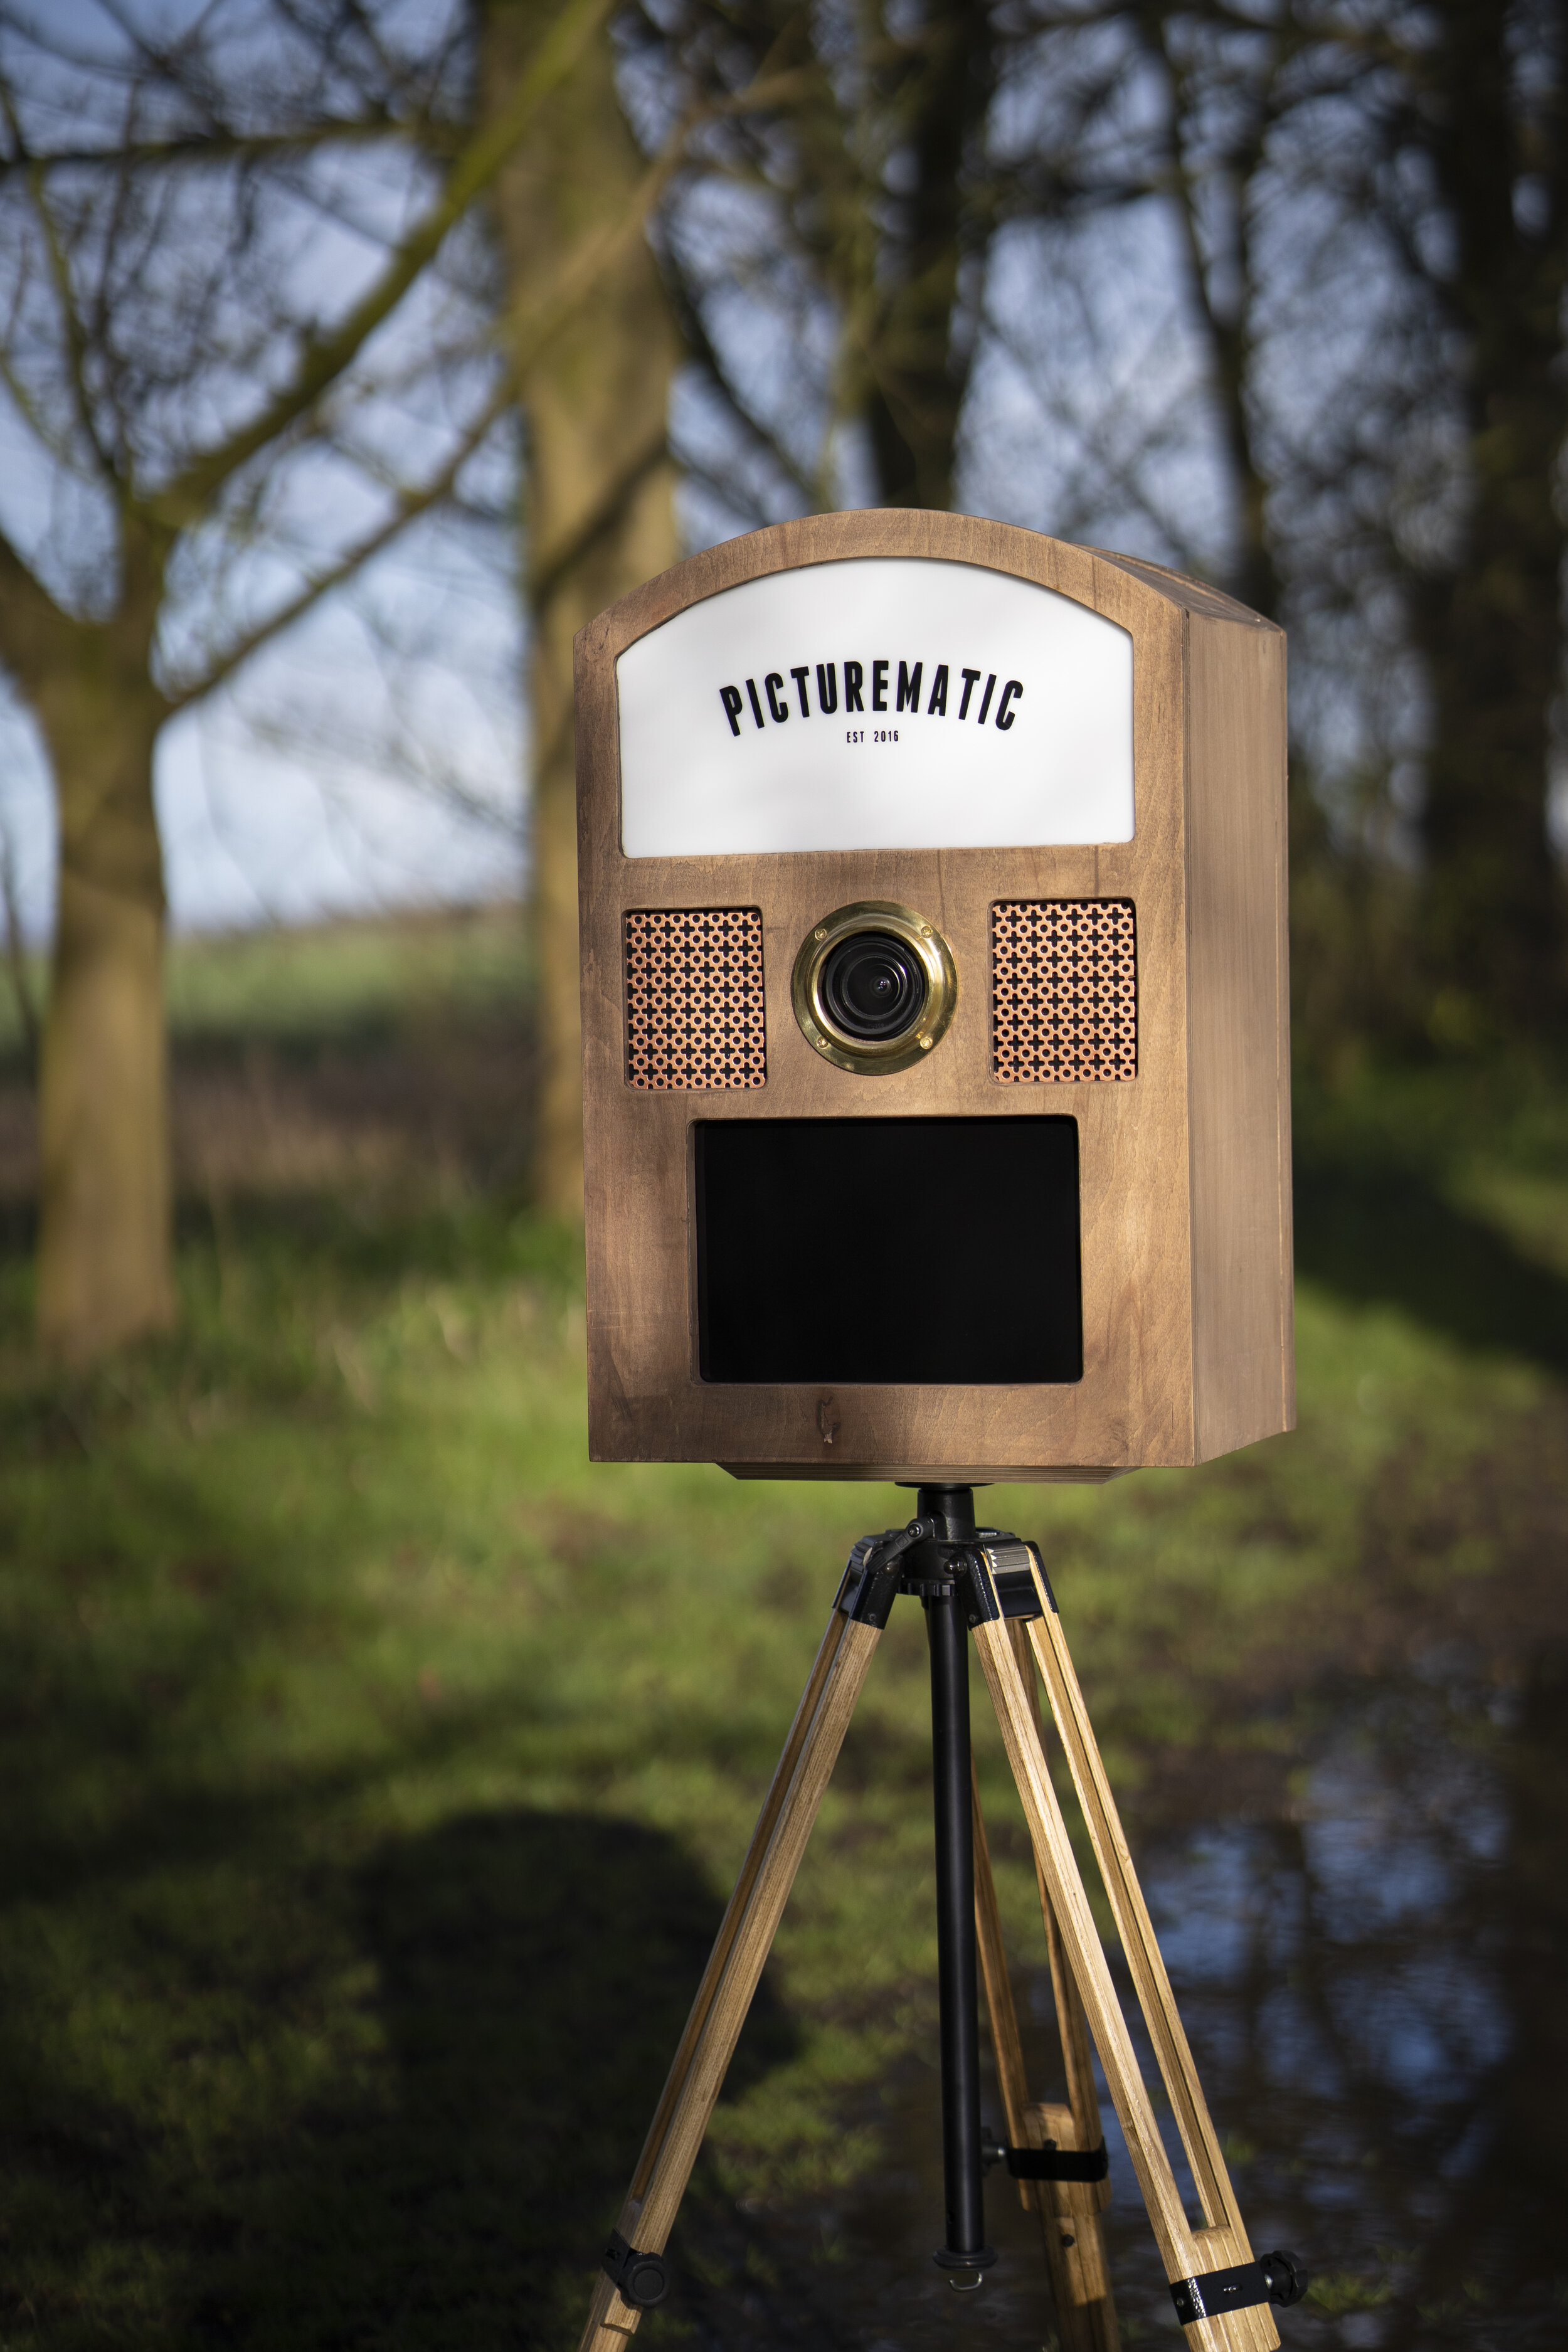 Picturematic's vintage photo booth.